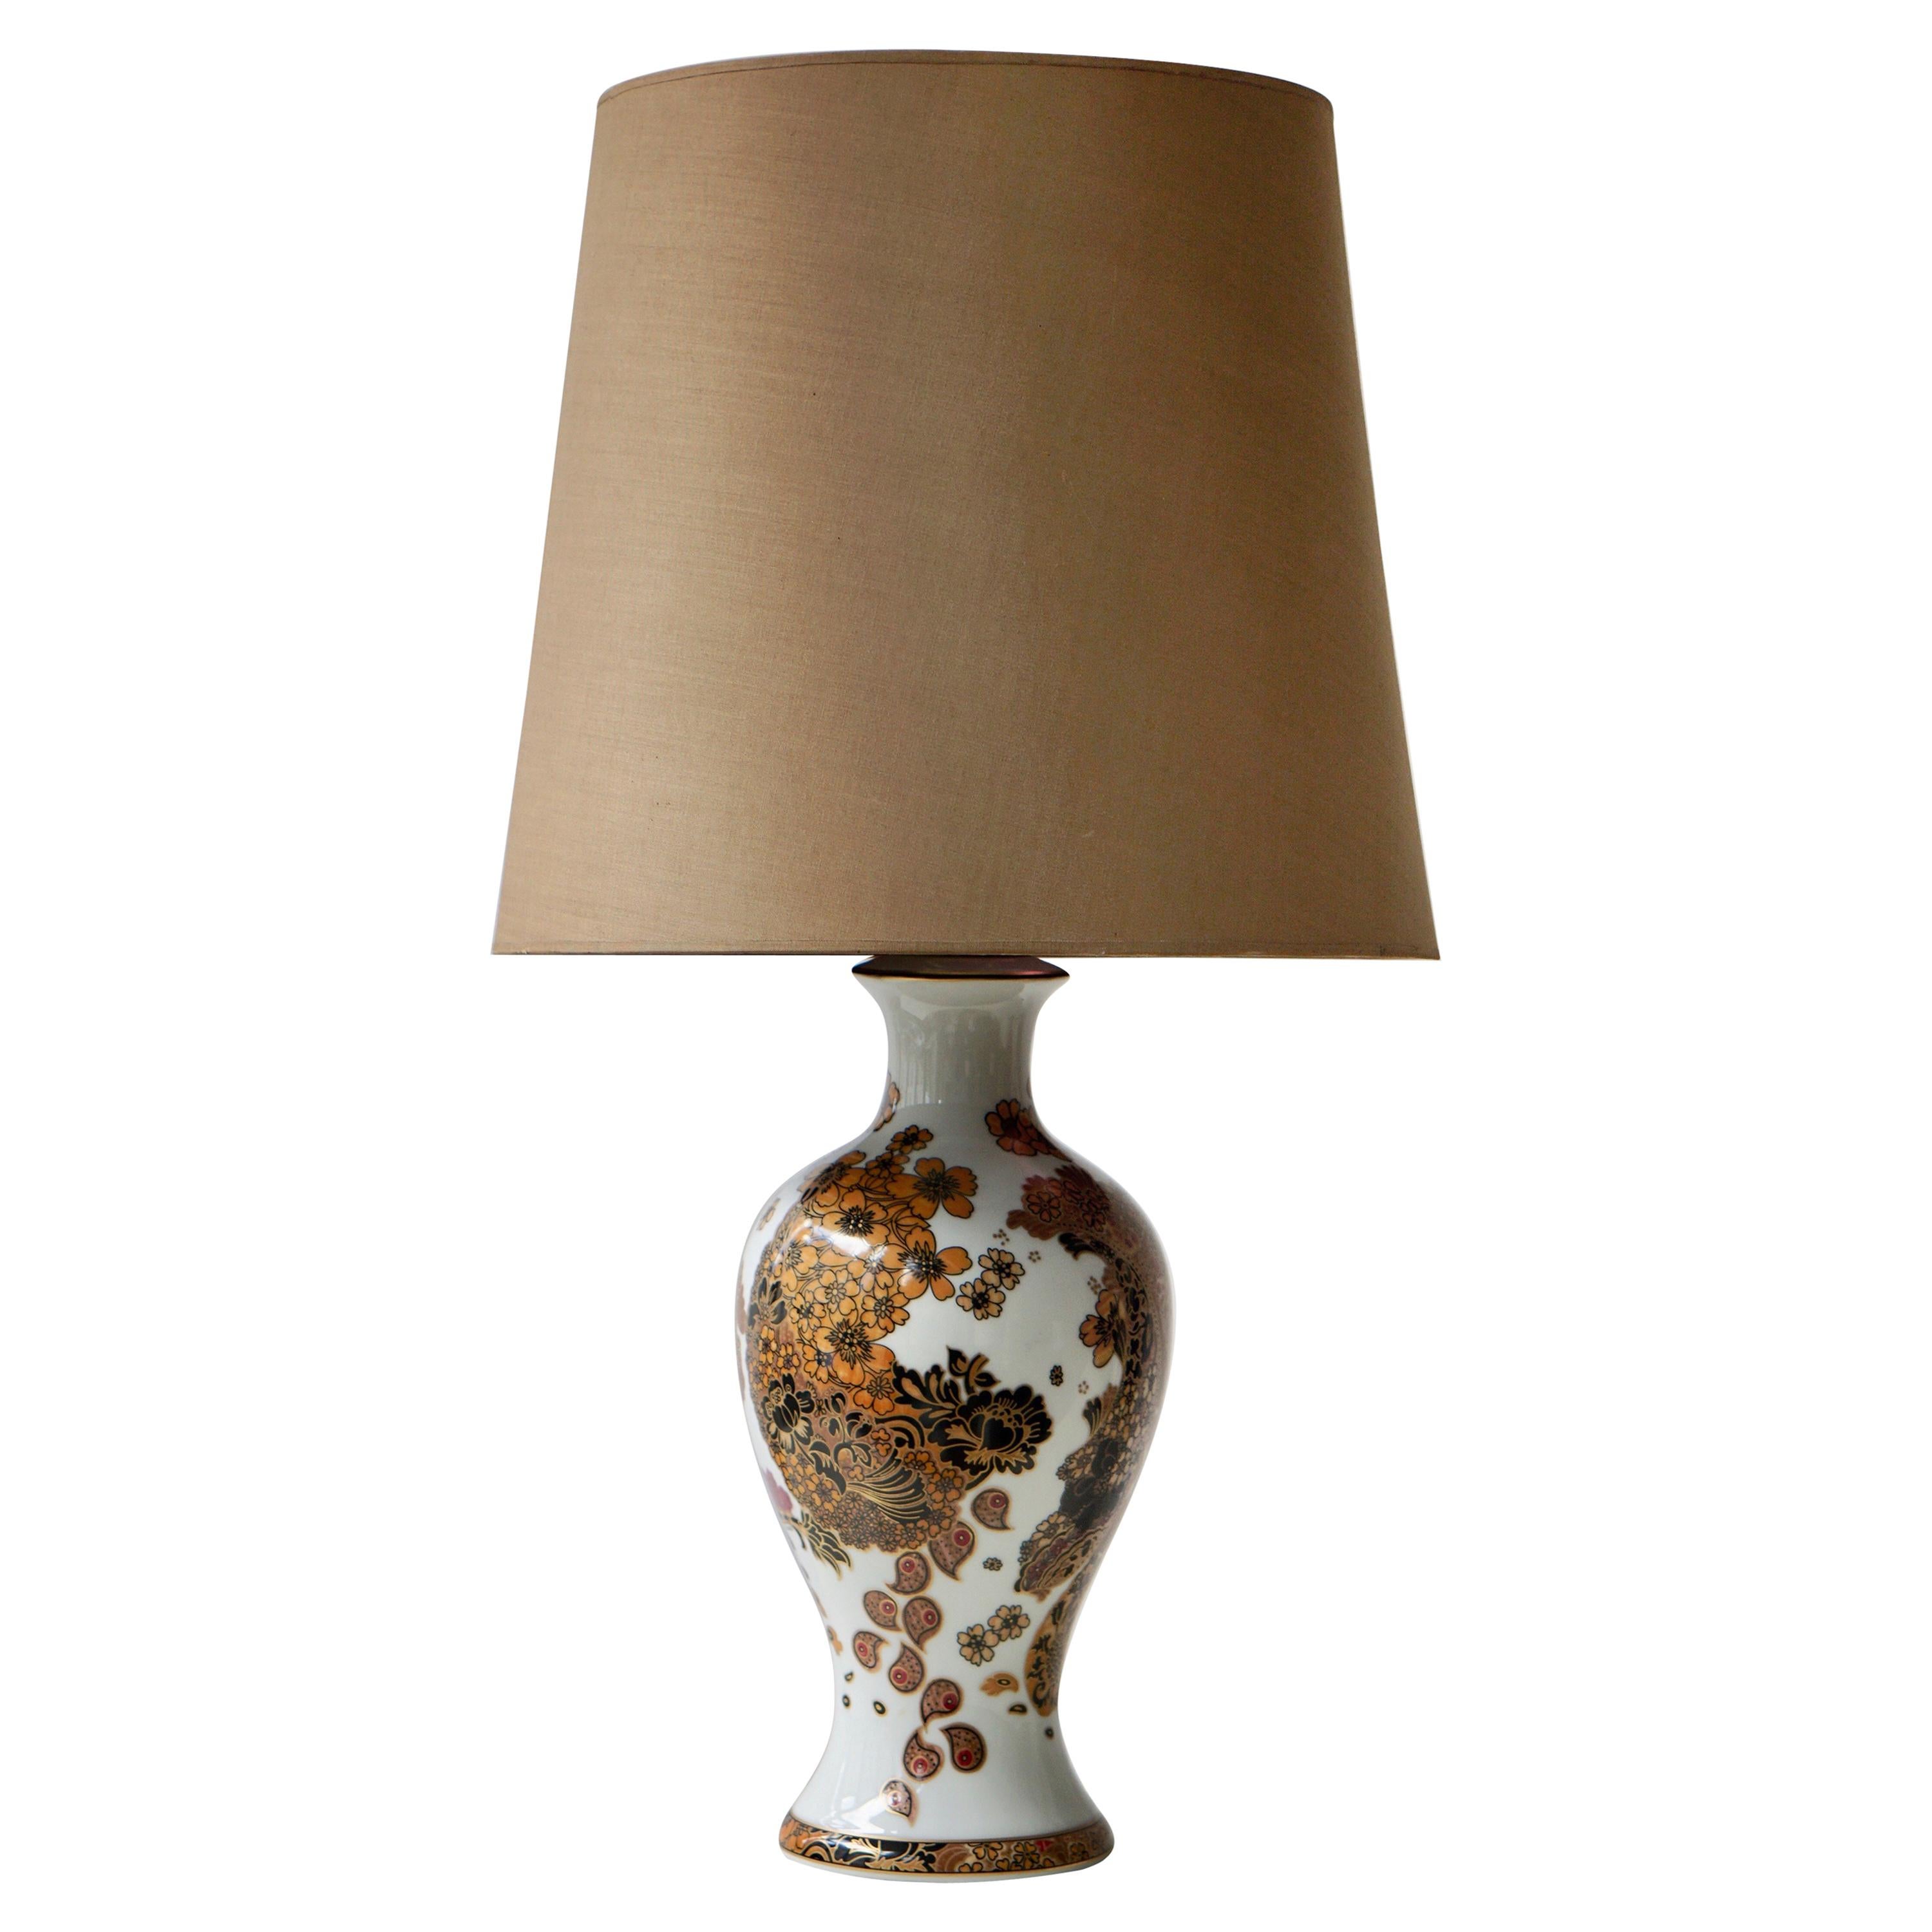 One Porcelain Table Lamp